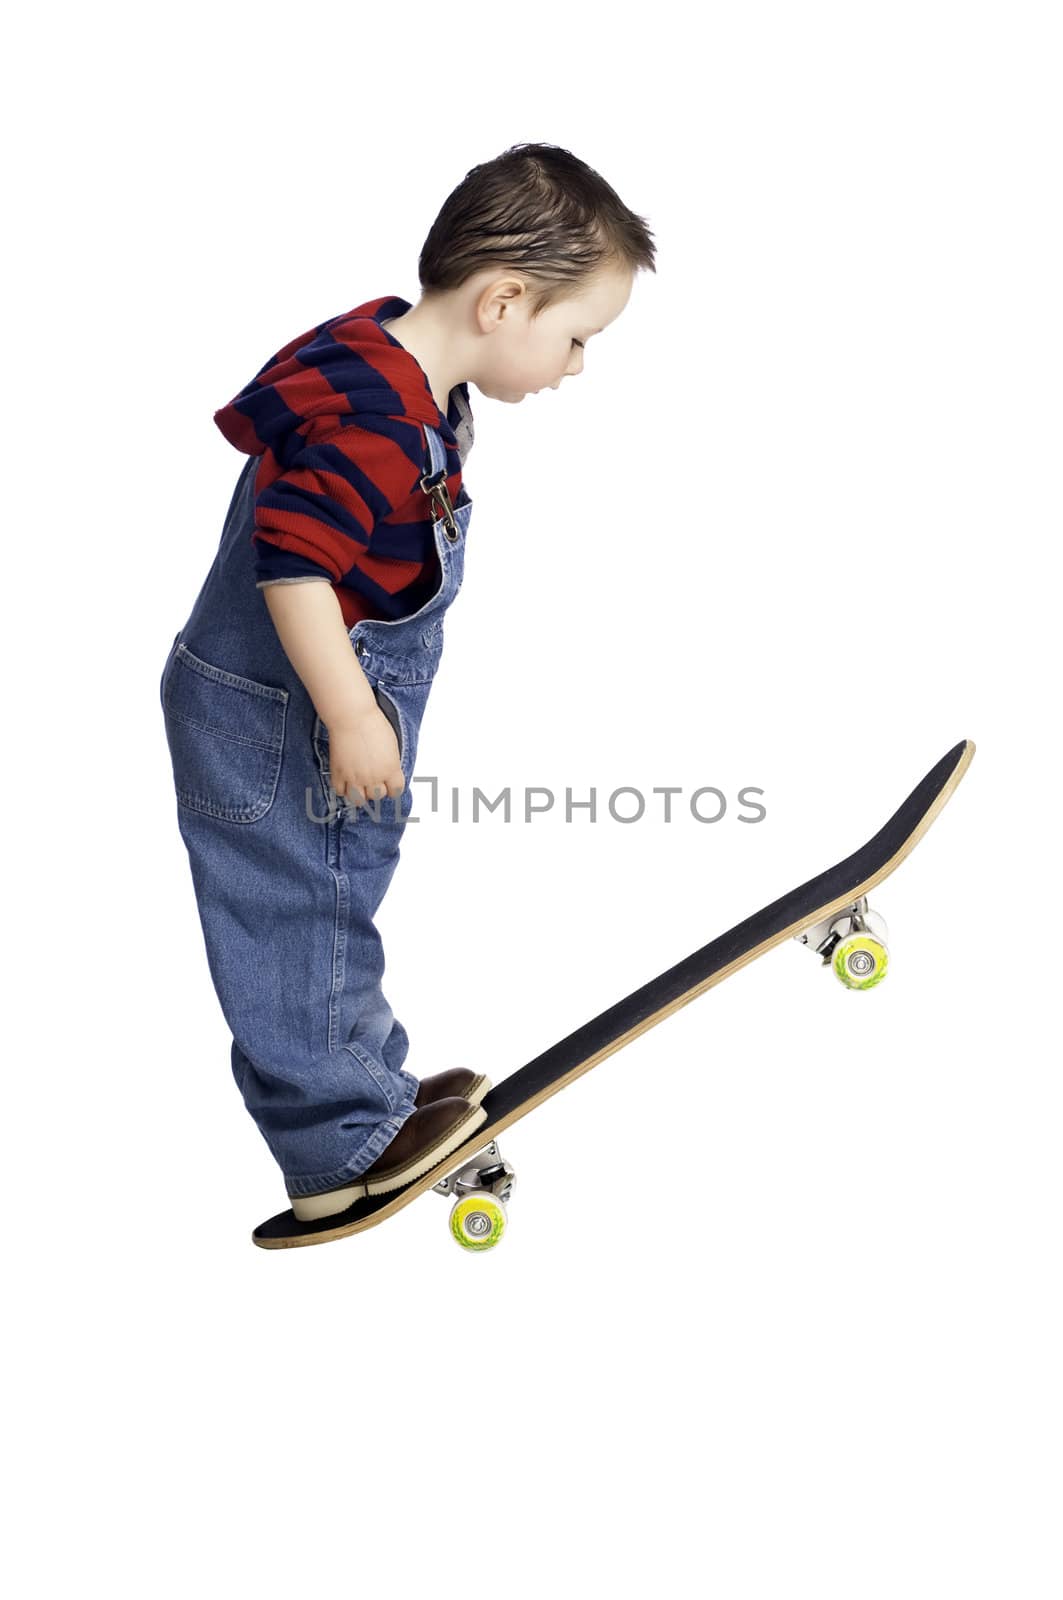 Curious two year old studying how to ride a skateboard like his older brother.